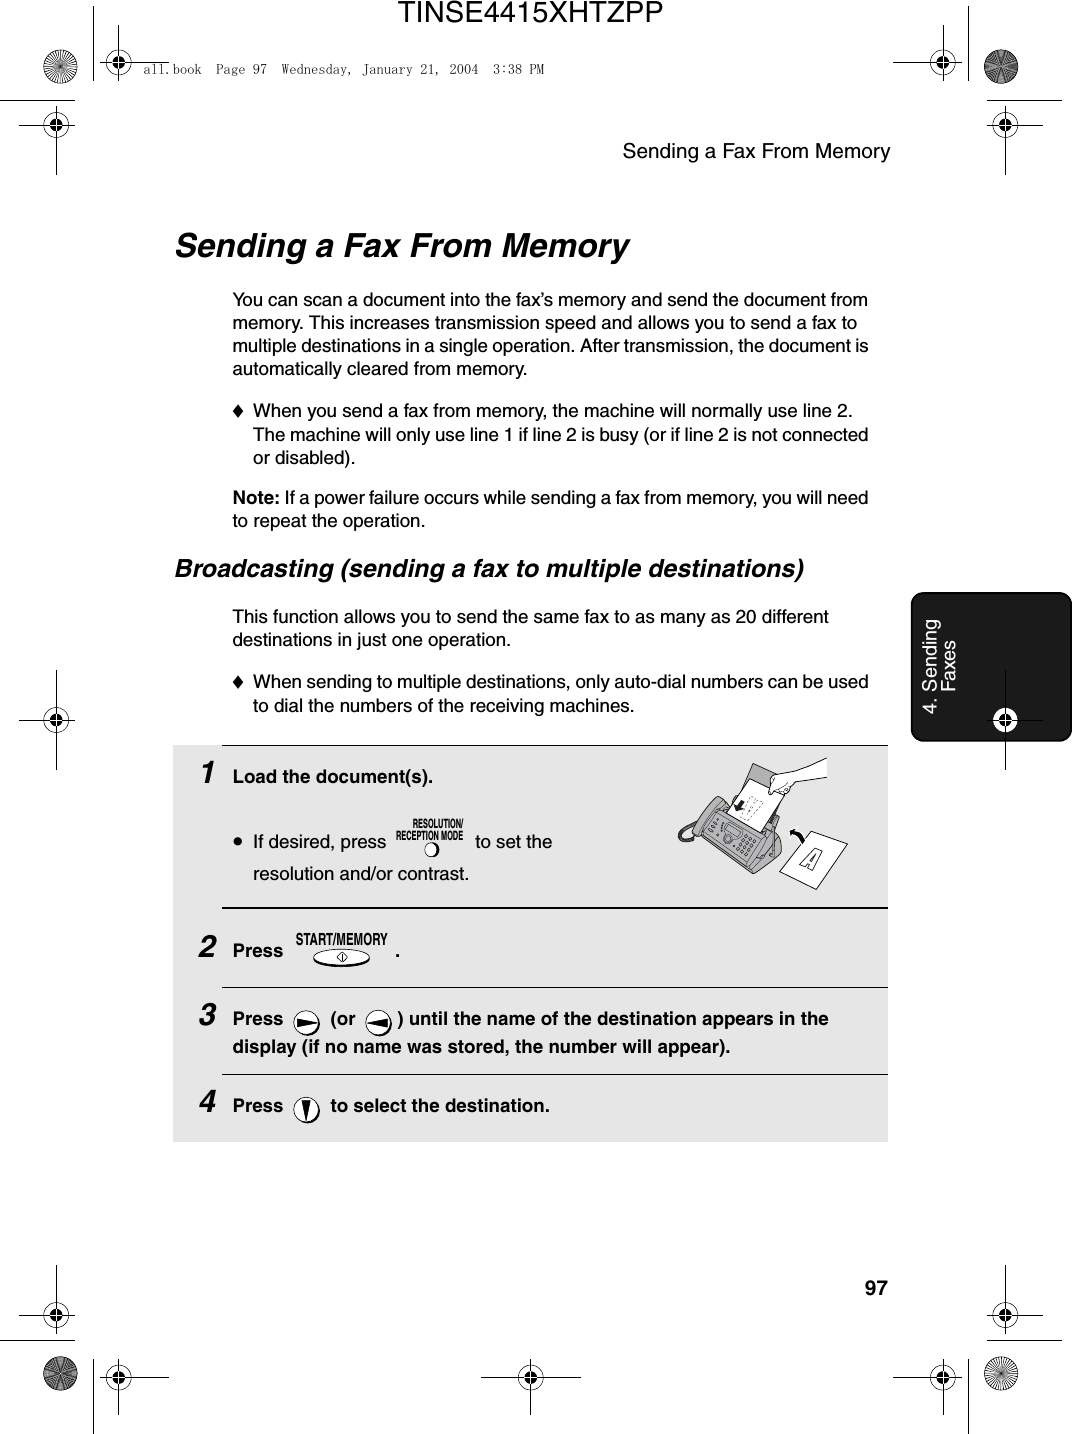 Sending a Fax From Memory974. Sending FaxesSending a Fax From MemoryYou can scan a document into the fax’s memory and send the document from memory. This increases transmission speed and allows you to send a fax to multiple destinations in a single operation. After transmission, the document is automatically cleared from memory.♦When you send a fax from memory, the machine will normally use line 2. The machine will only use line 1 if line 2 is busy (or if line 2 is not connected or disabled).Note: If a power failure occurs while sending a fax from memory, you will need to repeat the operation.Broadcasting (sending a fax to multiple destinations)This function allows you to send the same fax to as many as 20 different destinations in just one operation. ♦When sending to multiple destinations, only auto-dial numbers can be used to dial the numbers of the receiving machines.1Load the document(s).•If desired, press   to set the resolution and/or contrast.2Press .3Press   (or  ) until the name of the destination appears in the display (if no name was stored, the number will appear).4Press   to select the destination.RESOLUTION/RECEPTION MODESTART/MEMORYall.book  Page 97  Wednesday, January 21, 2004  3:38 PMTINSE4415XHTZPP